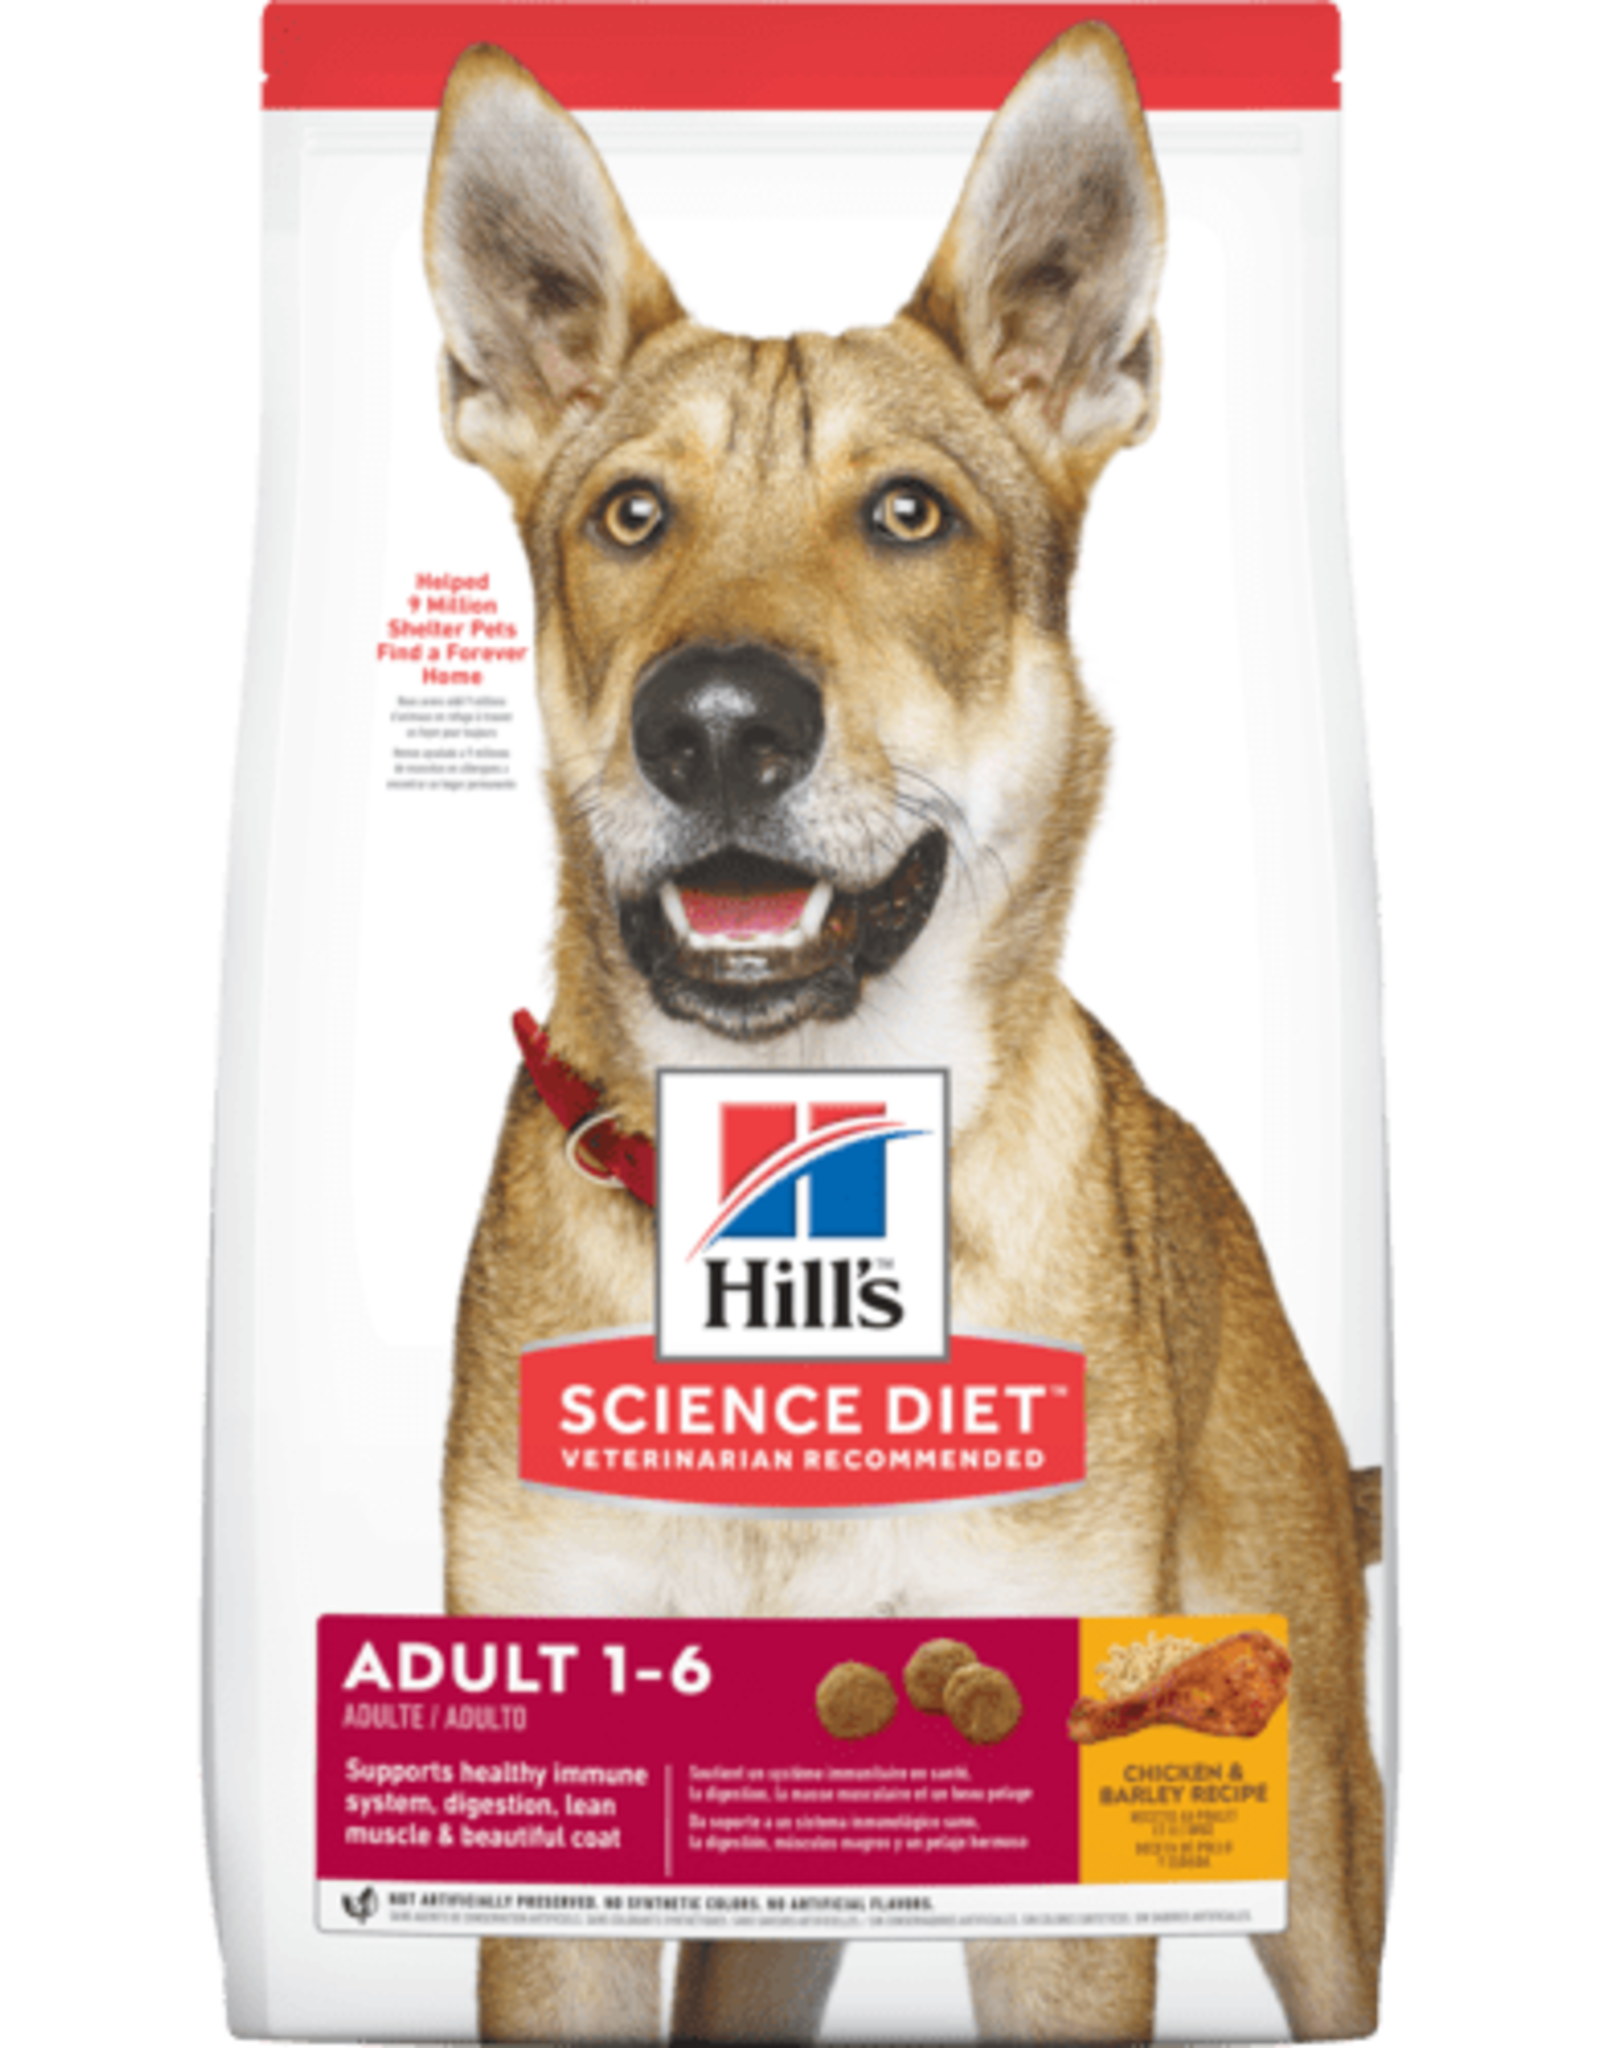 SCIENCE DIET HILL'S SCIENCE DIET CANINE ADULT ORIGINAL 15LBS